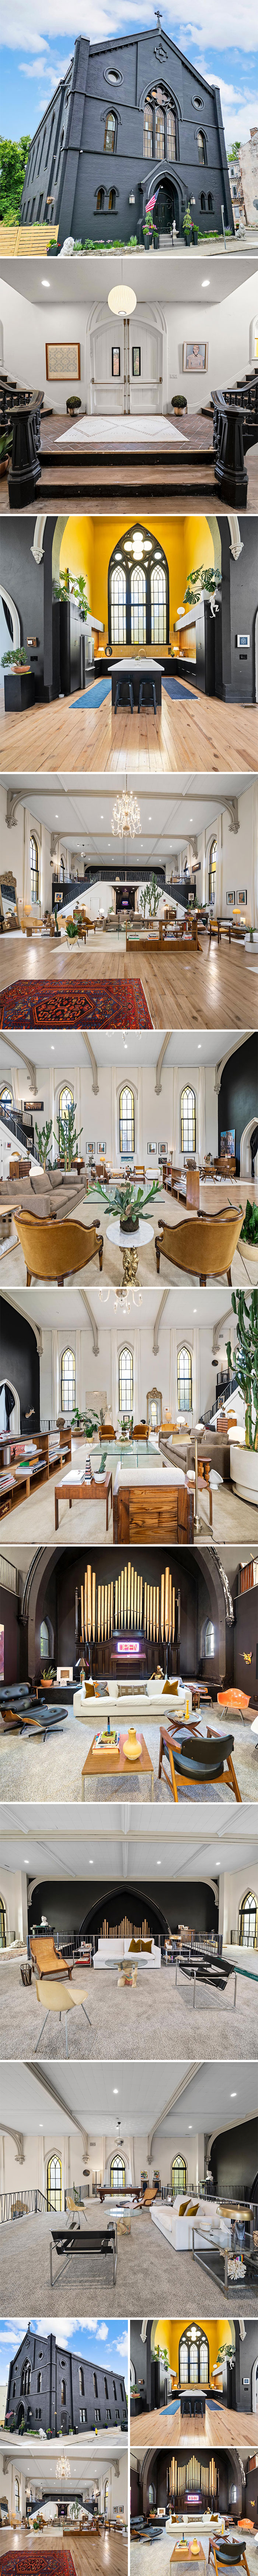 This Former Cincinnati Church Has A Very Gothy Exterior And A Really Cool Interior? From What I Understand From The Listing There Are 3 Separate Living Areas Within The Former Church And The Main Home Is Pretty Pretty Pretty Pretty Good? $1,649,000